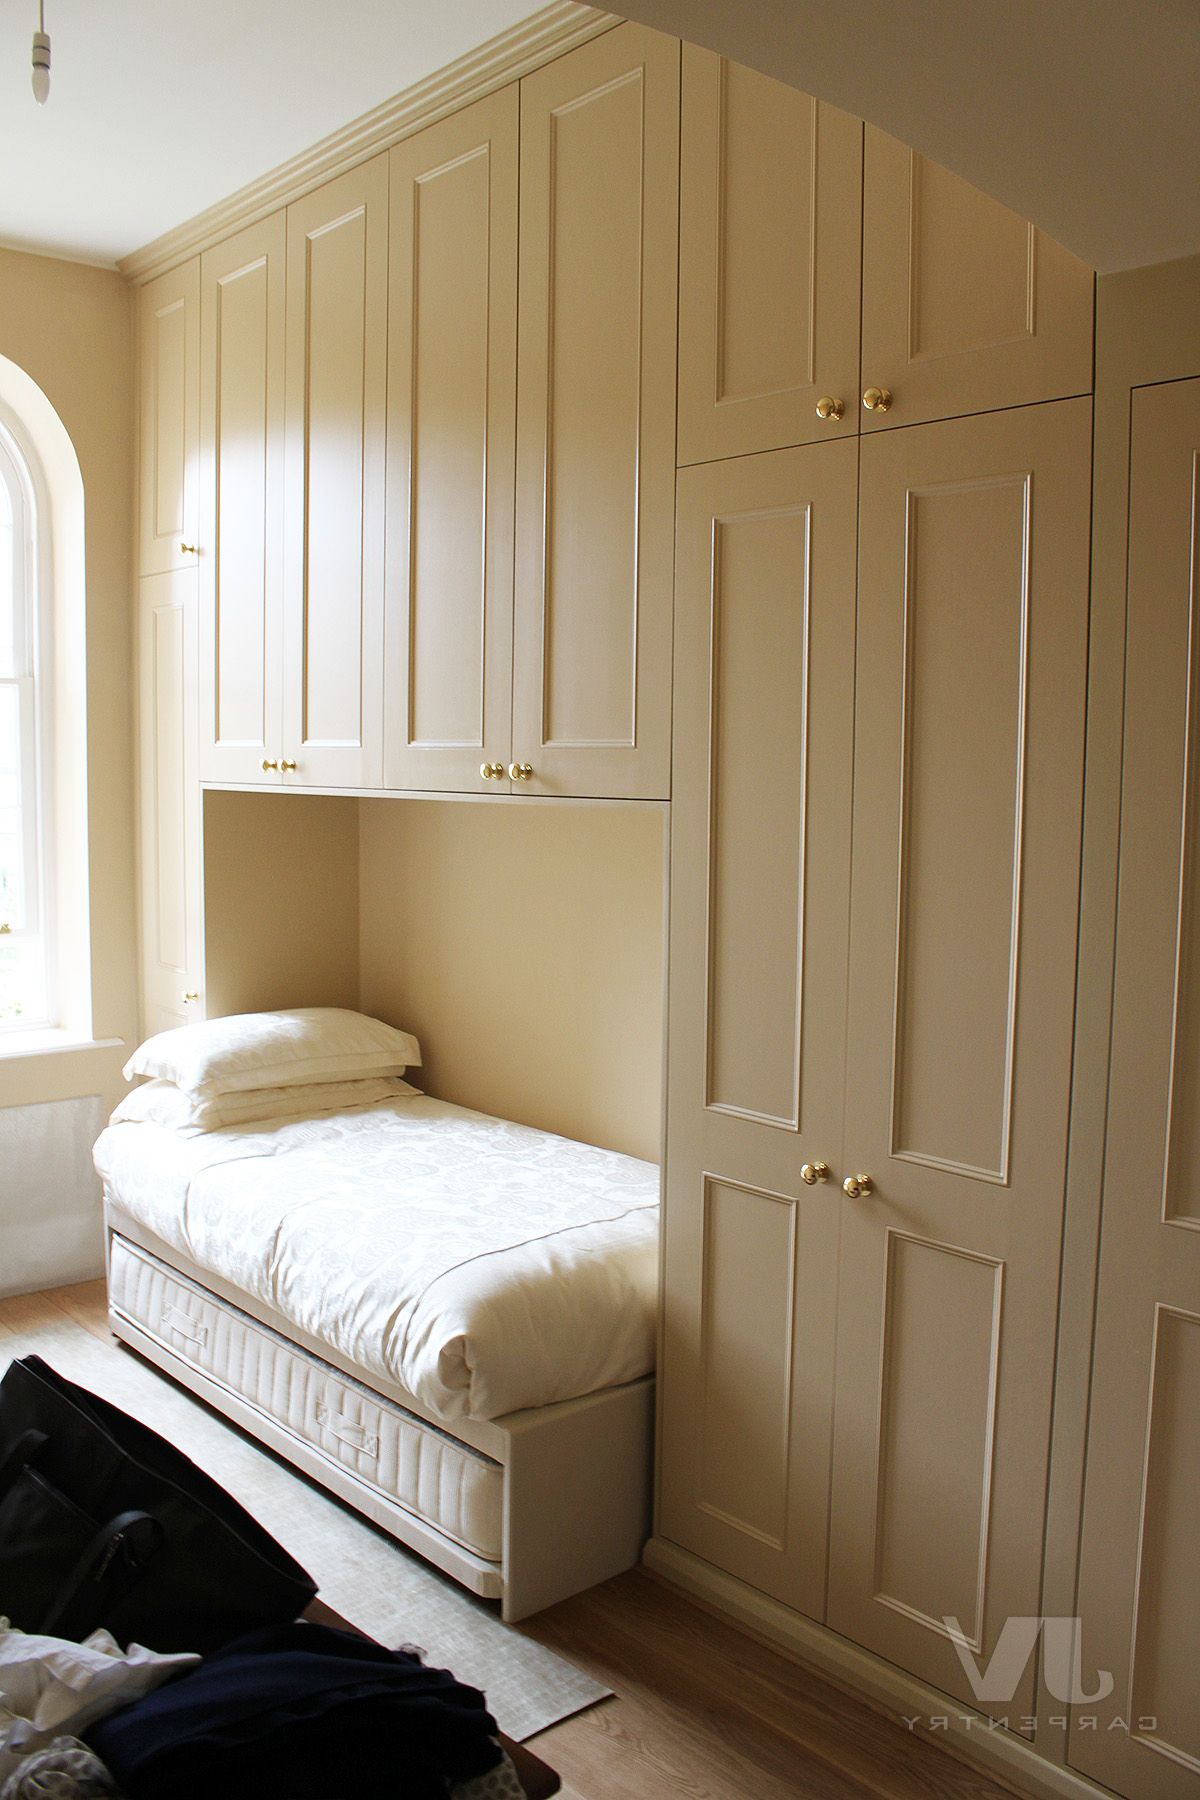 12 Fitted Wardrobes Over Bed Ideas For Your Bedroom | Jv Carpentry With Regard To Overbed Wardrobes (Gallery 17 of 20)